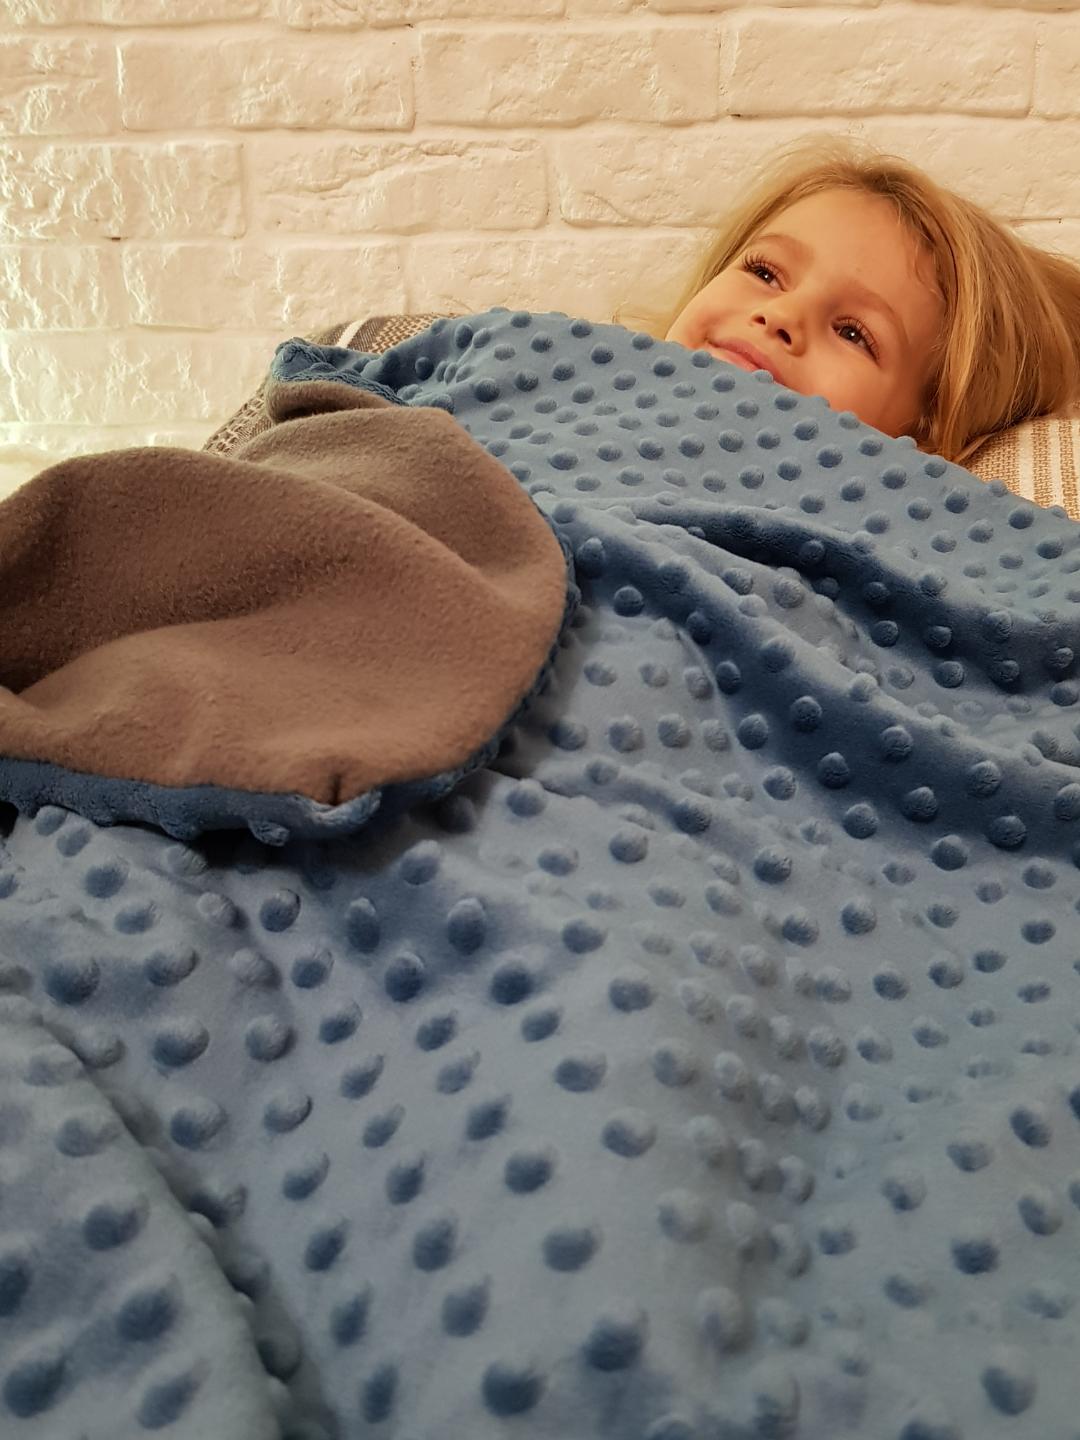 3kg Weighted Blanket Small (90cm x 100cm) in Blue/Grey – The Sensory